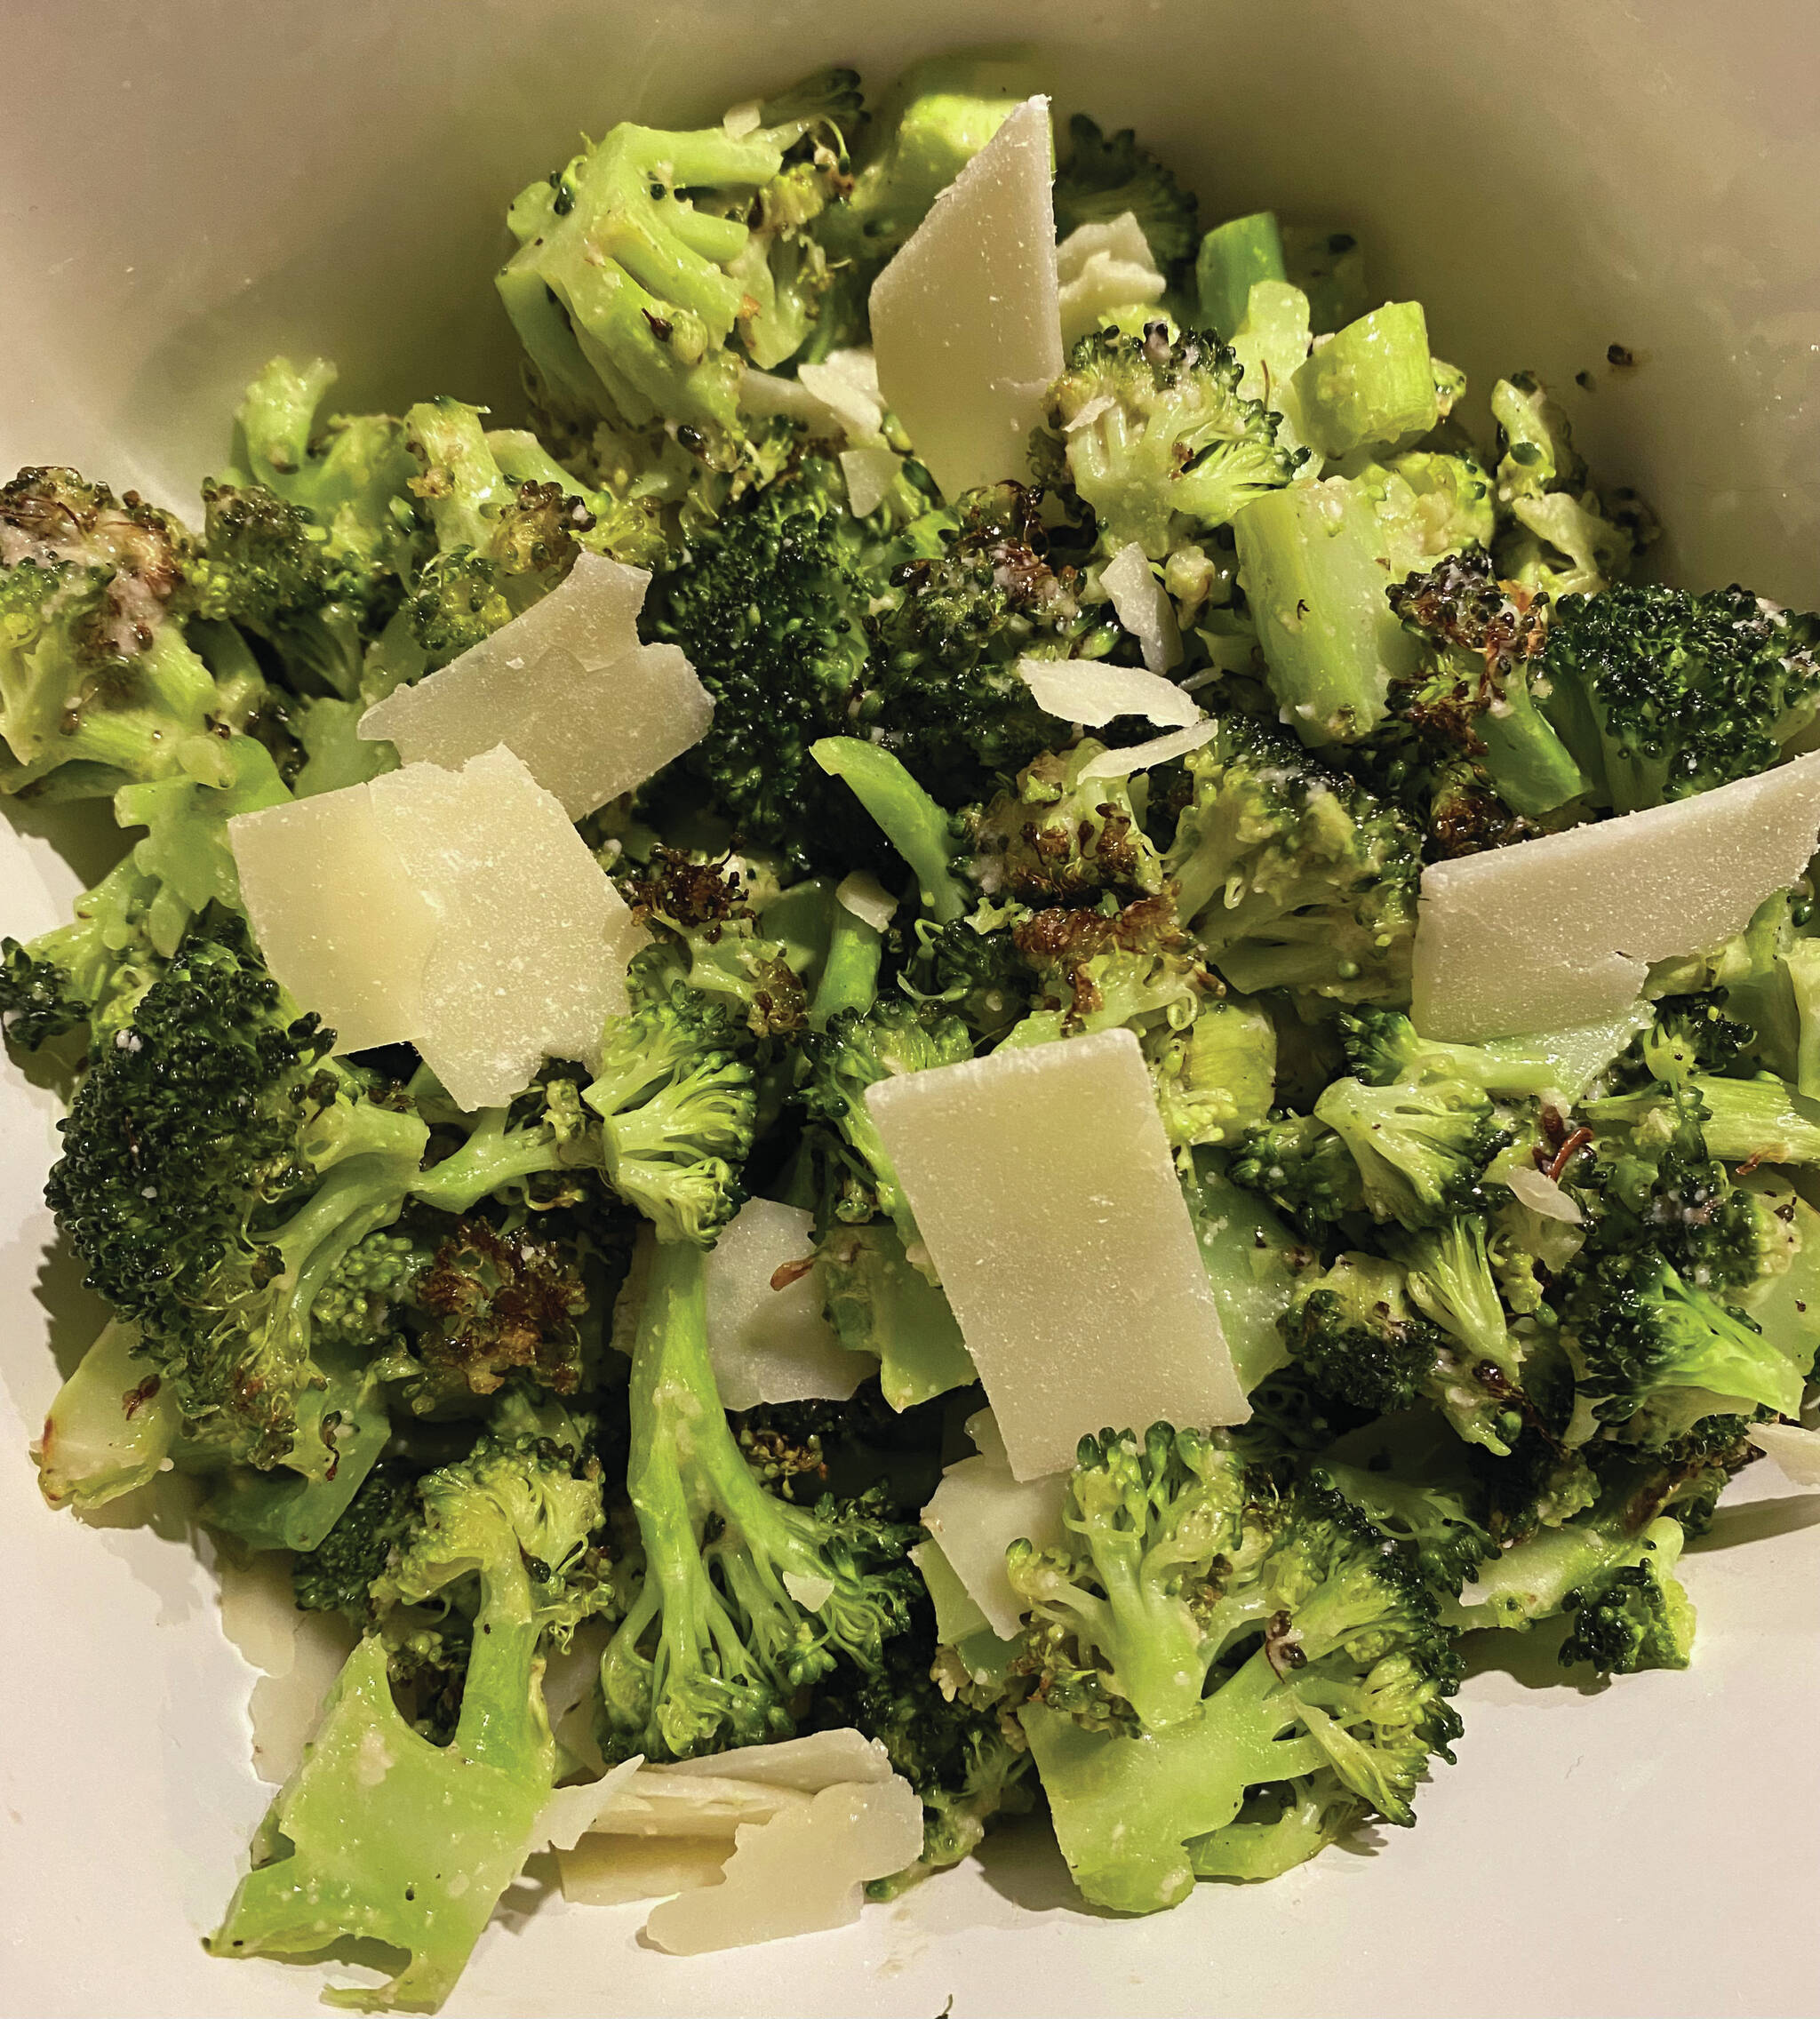 Roasted Broccoli Caesar Salad would be perfect alongside your Thanksgiving spread and provides some much-needed greens and fiber to balance out the rolls and gravy. (Photo by Tressa Dale/Peninsula Clarion)